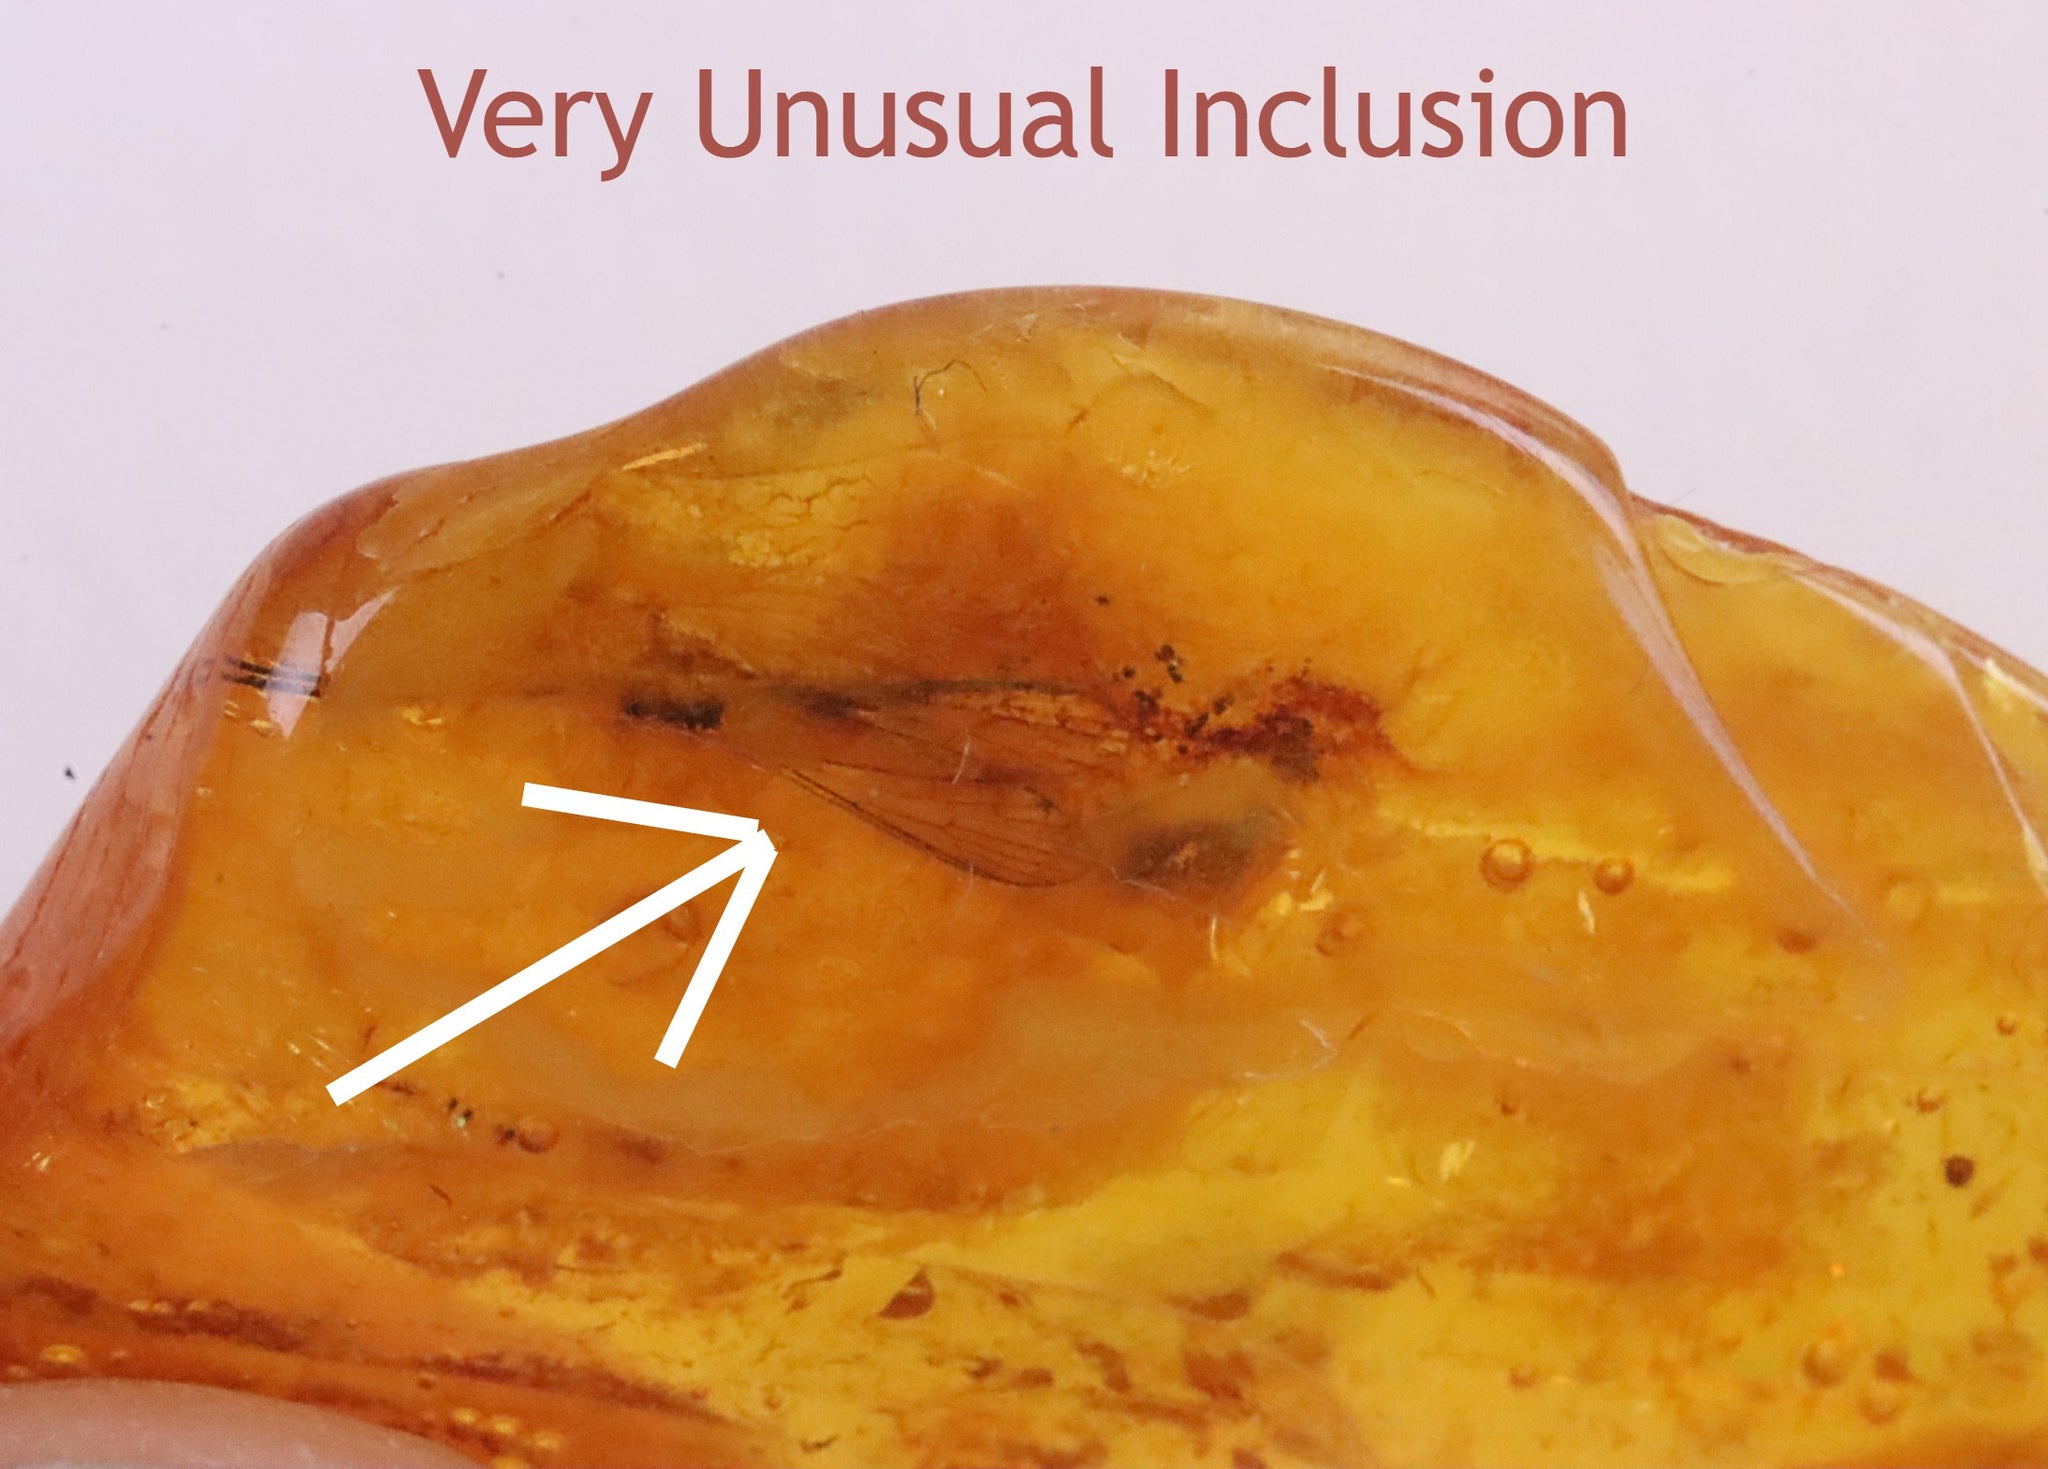 Insect Wings Inclusion in Baltic Amber